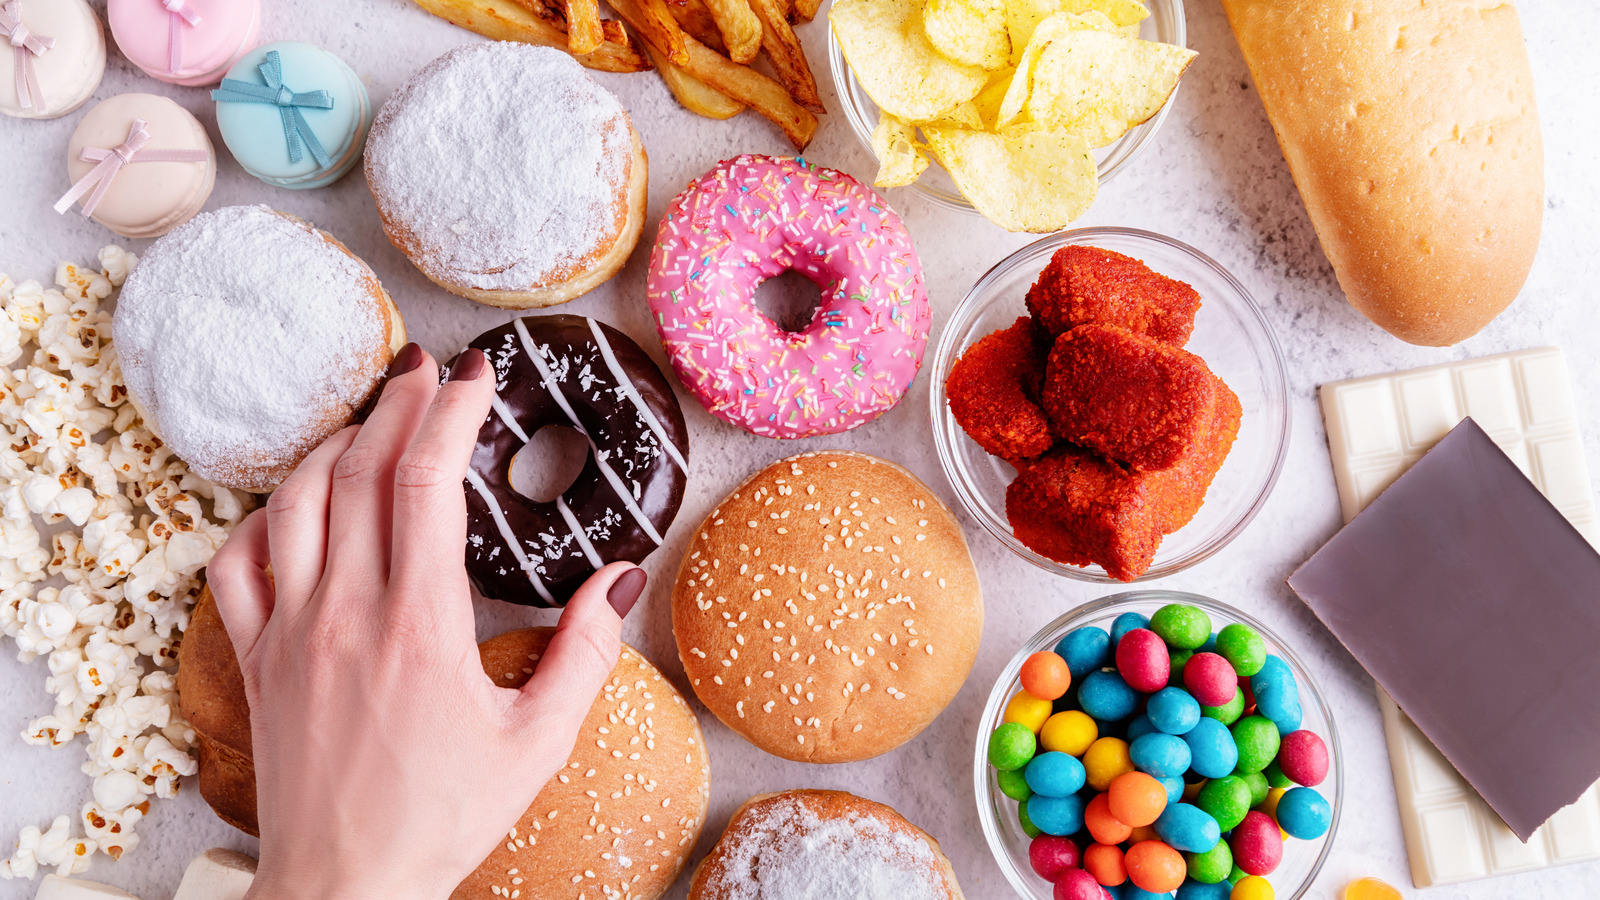 The Real Reason People Are Eating More Junk Food During The Pandemic 